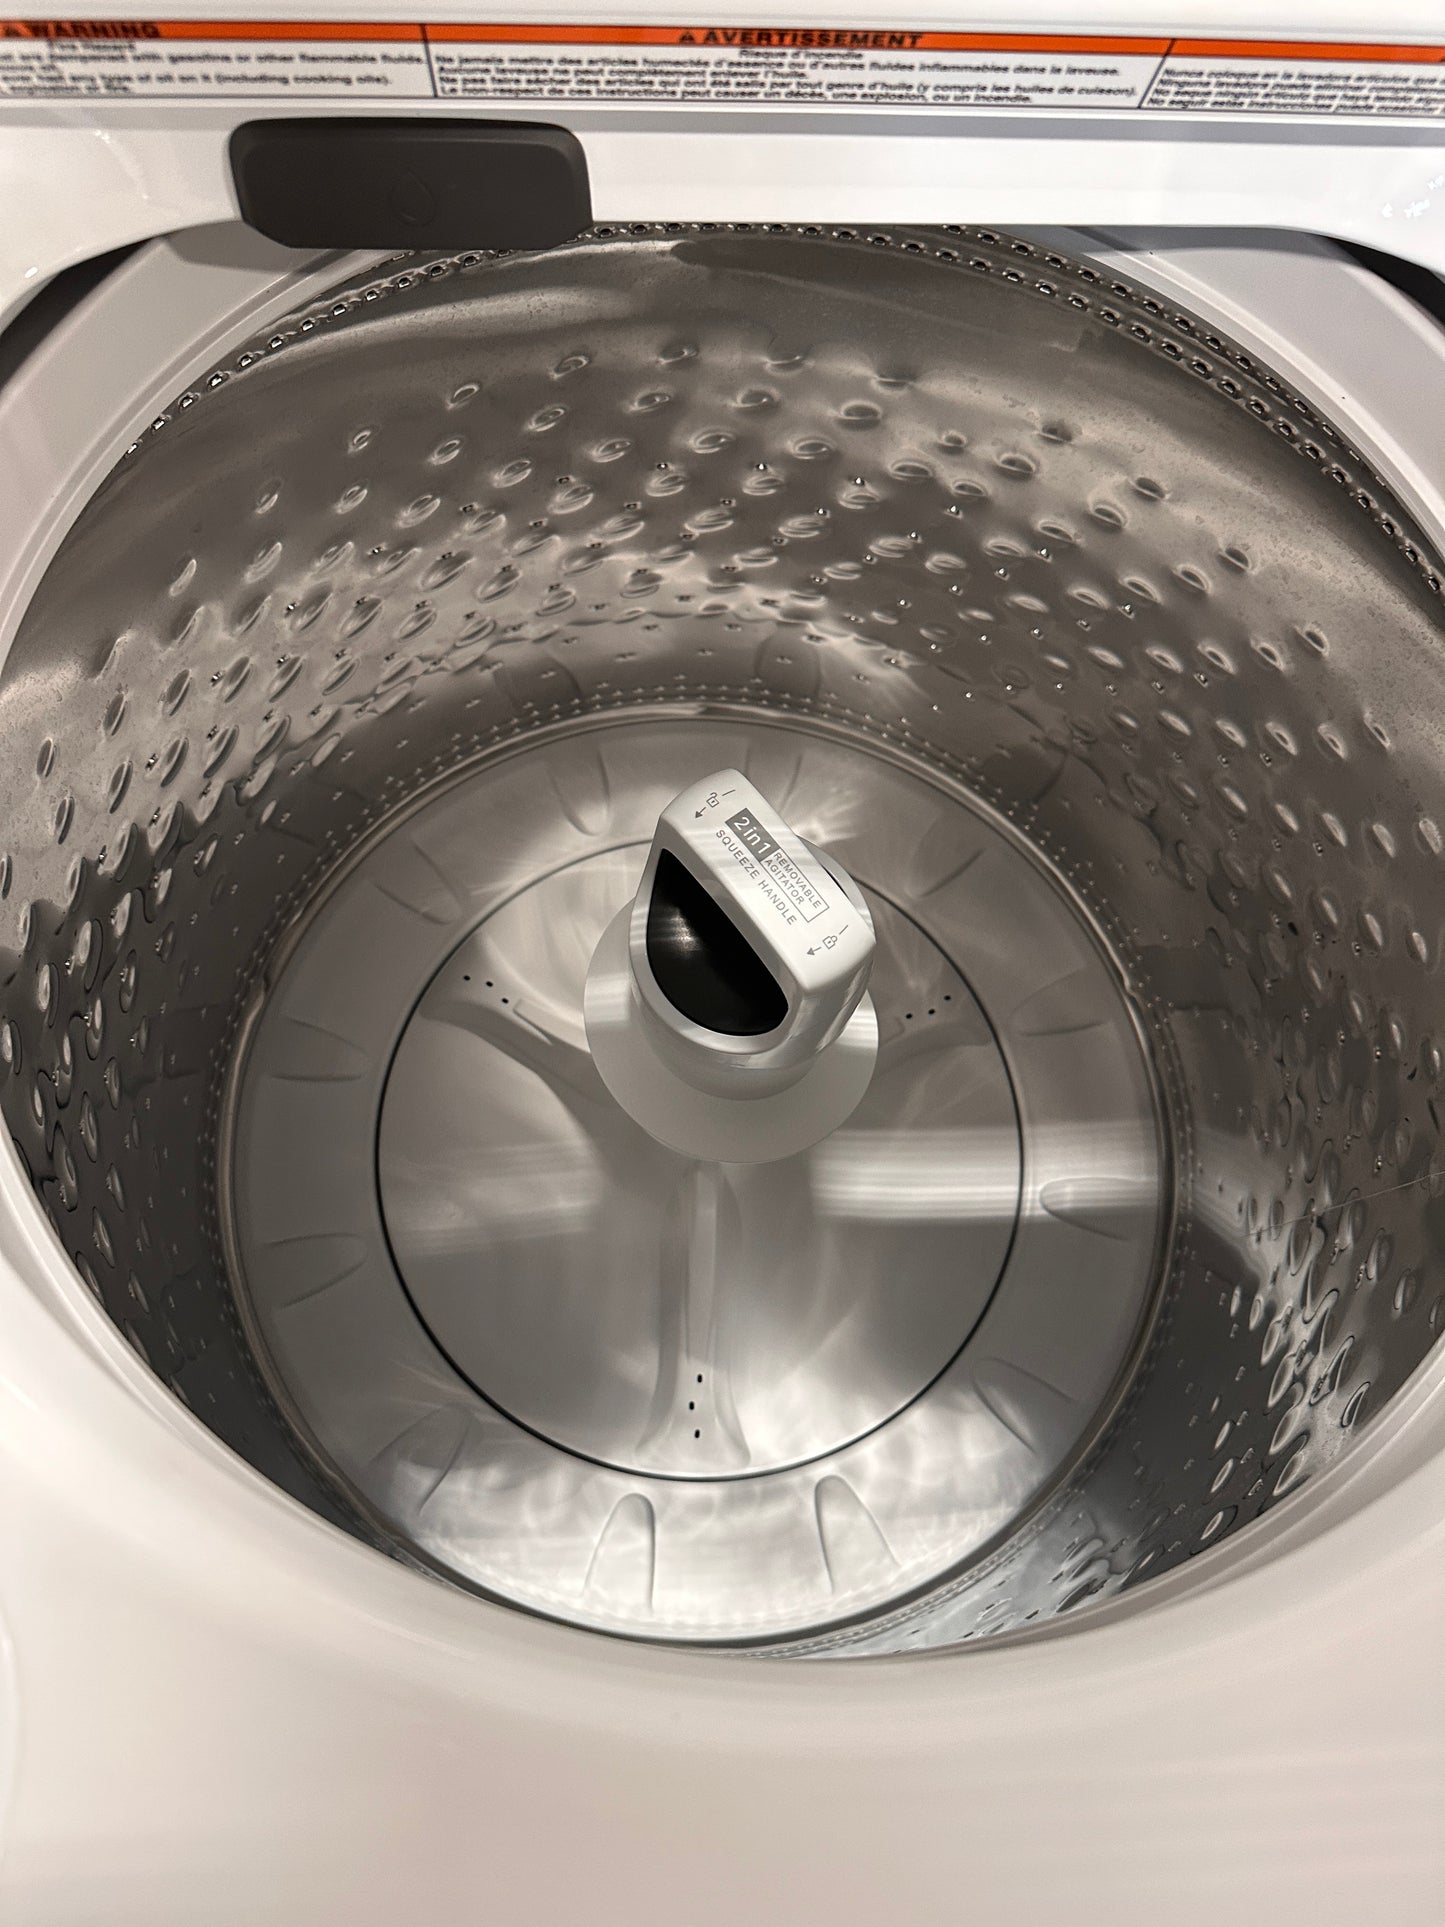 GREAT TOP LOAD WHIRLPOOL WASHER - WAS12983 WTW5057LW